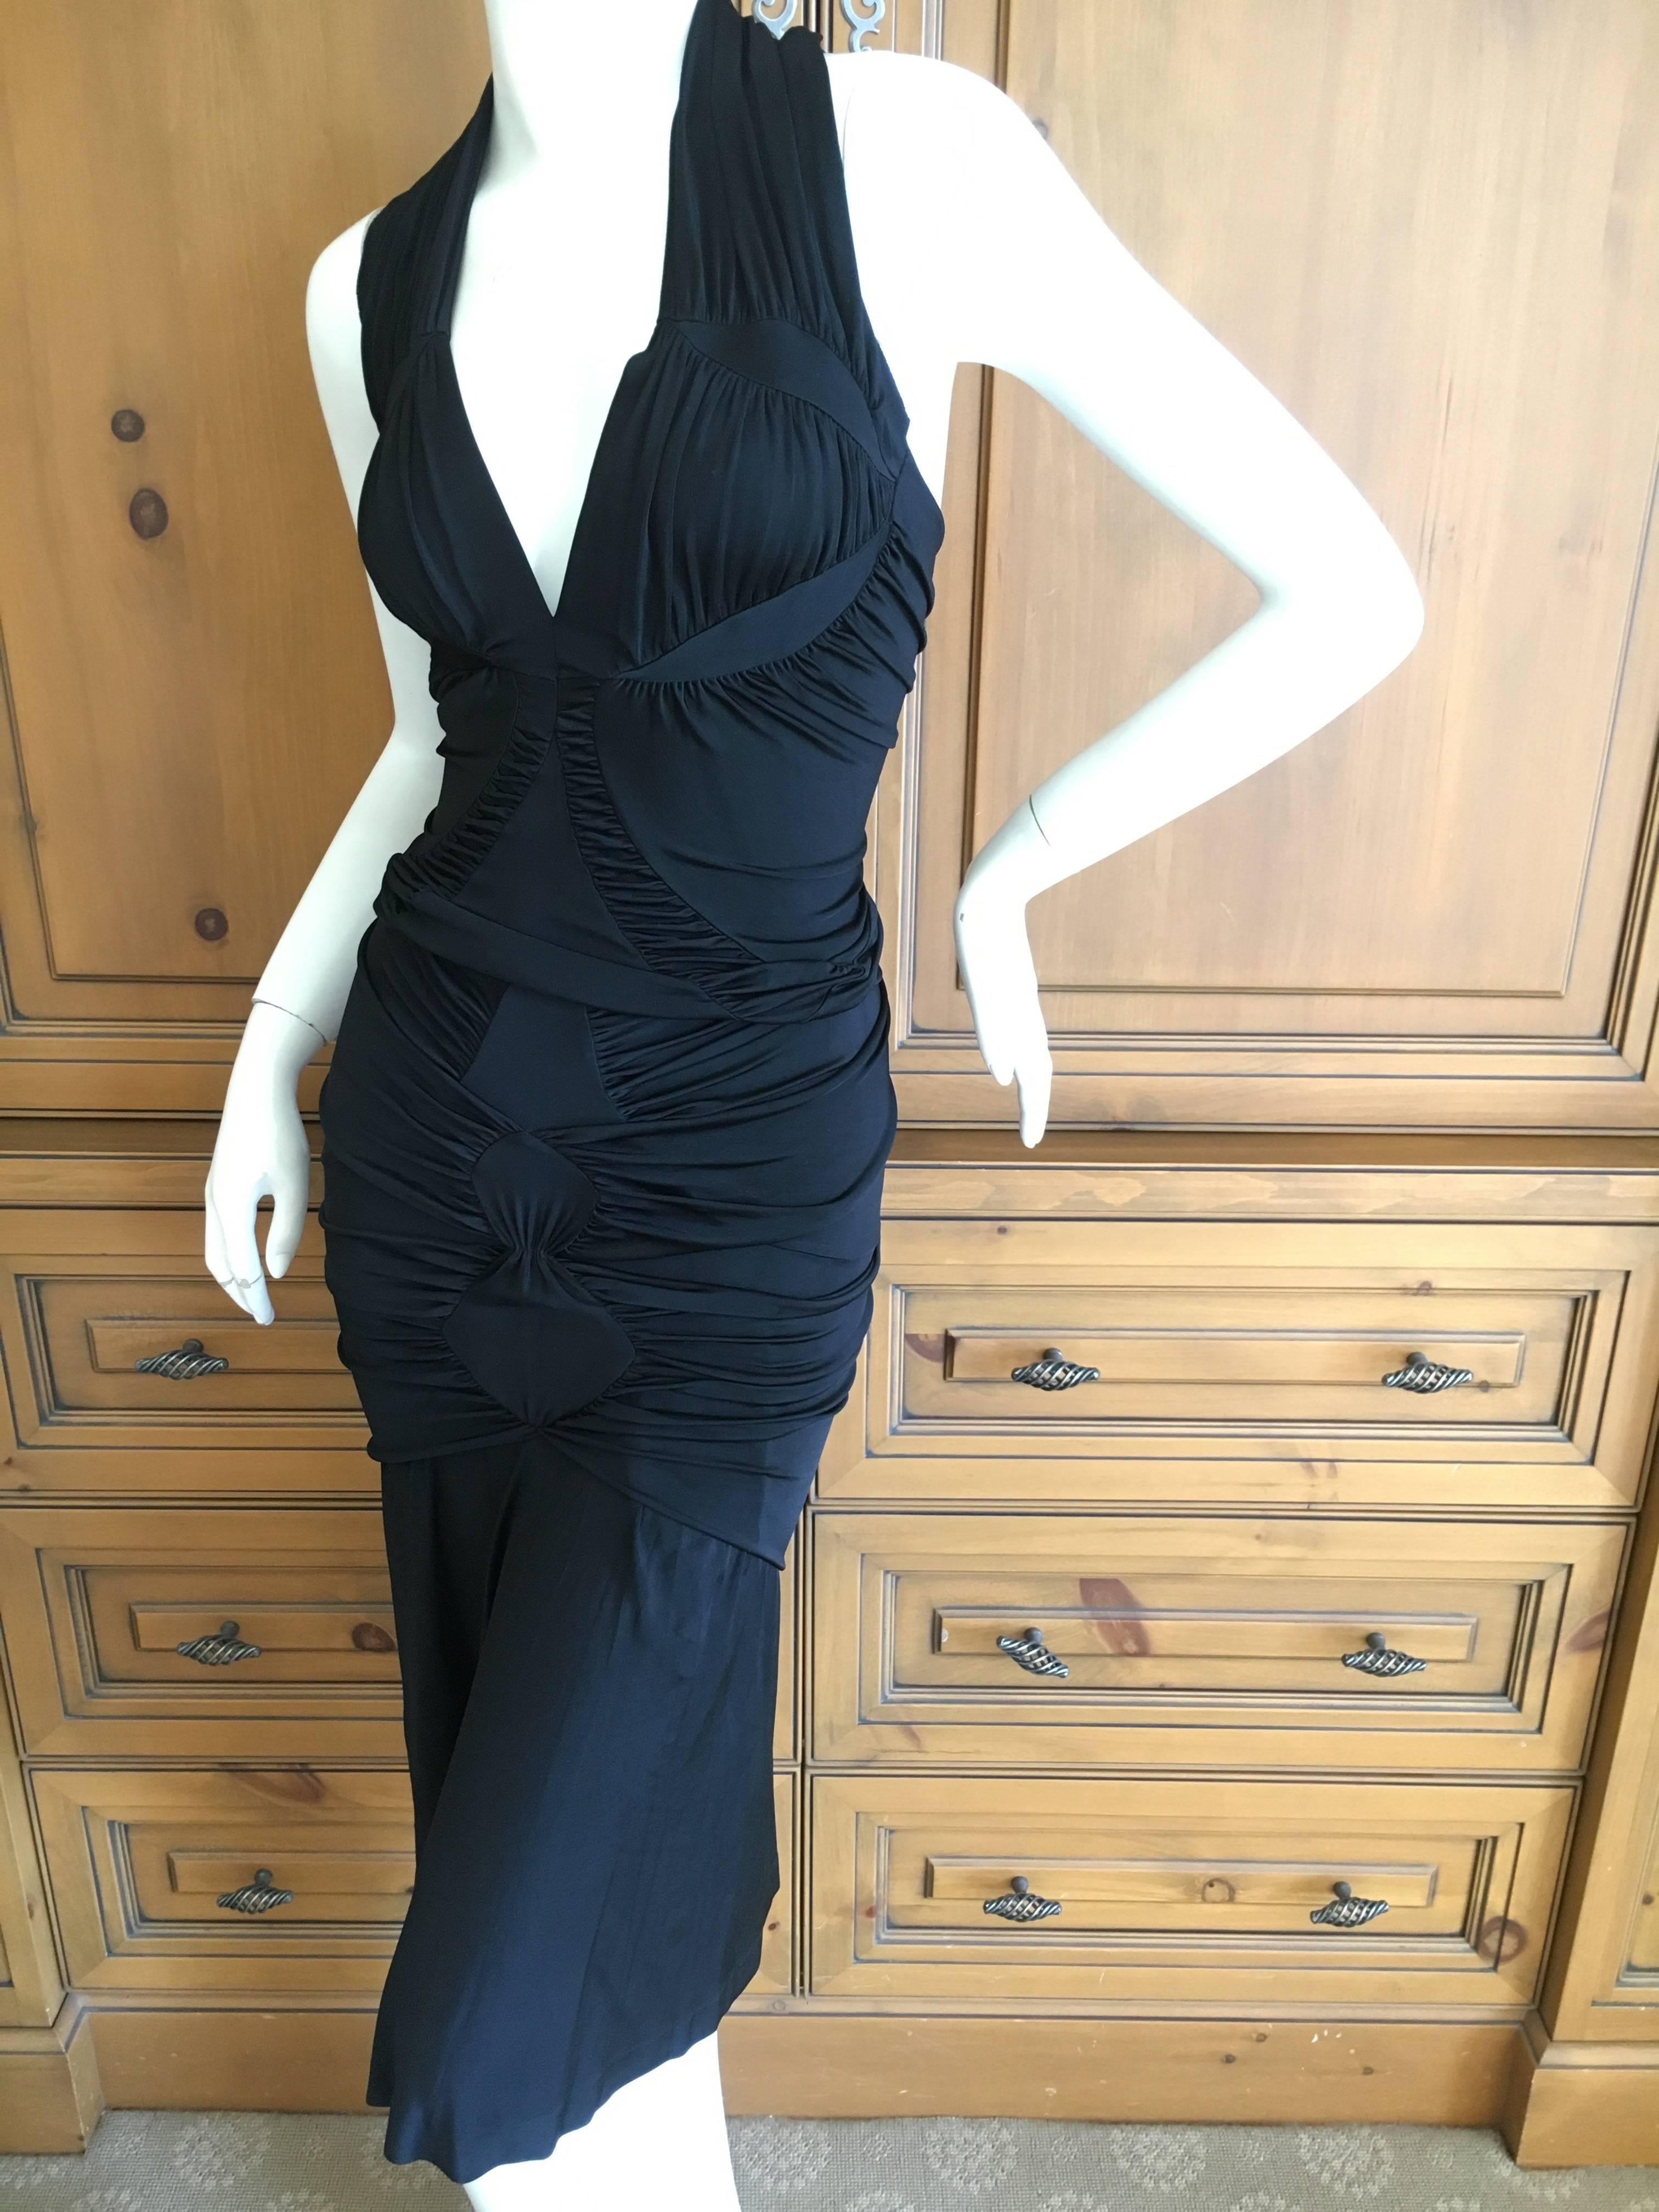 Yves Saint Laurent by Tom Ford Black Two Piece Cocktail Dress.
Skirt and top in black.
Size Small
Bust 34"
Waist 25"
Hip 38"
